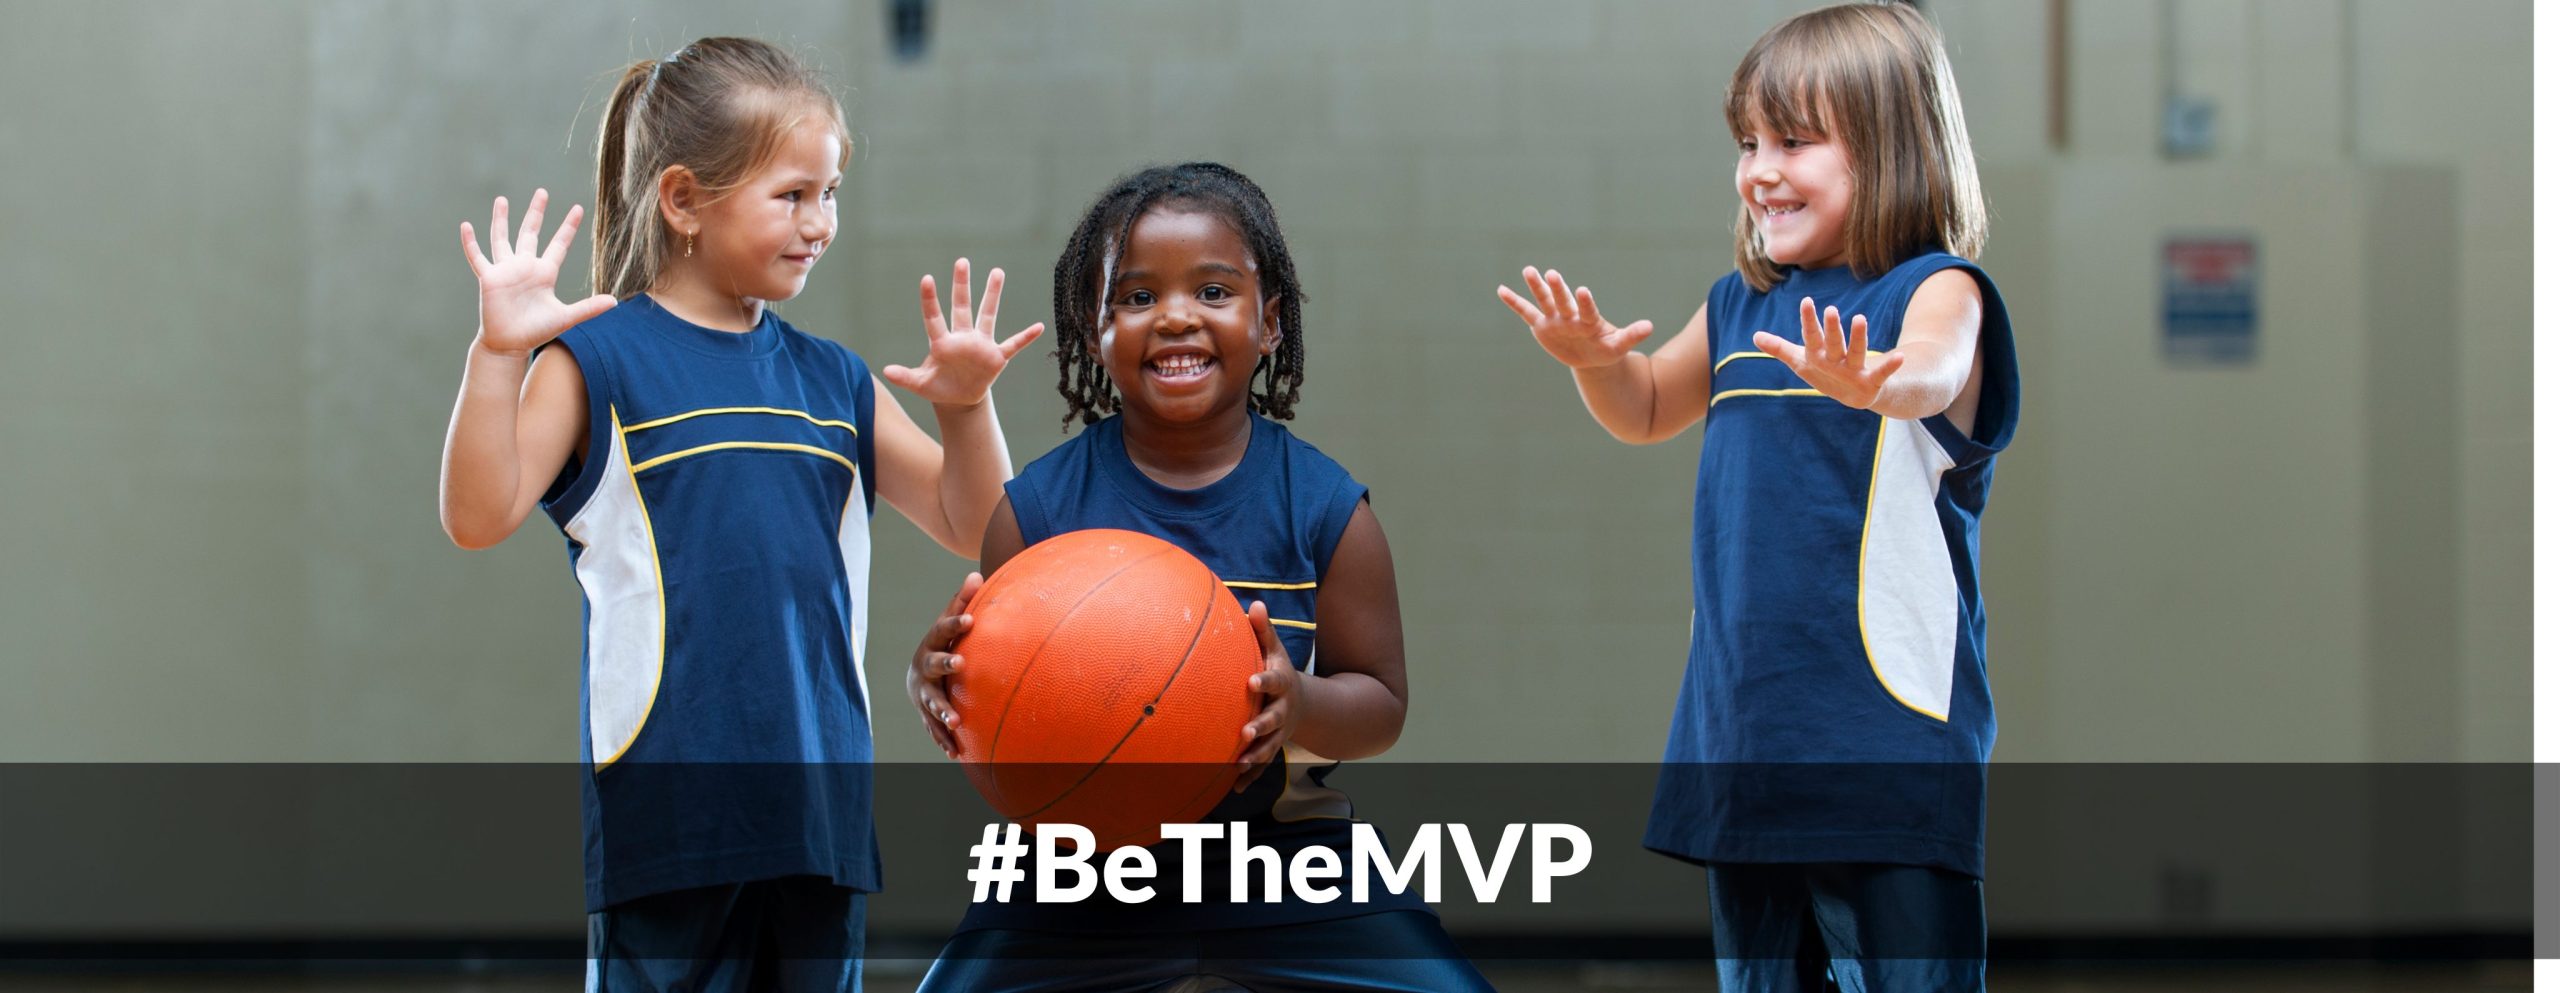 Be The MVP